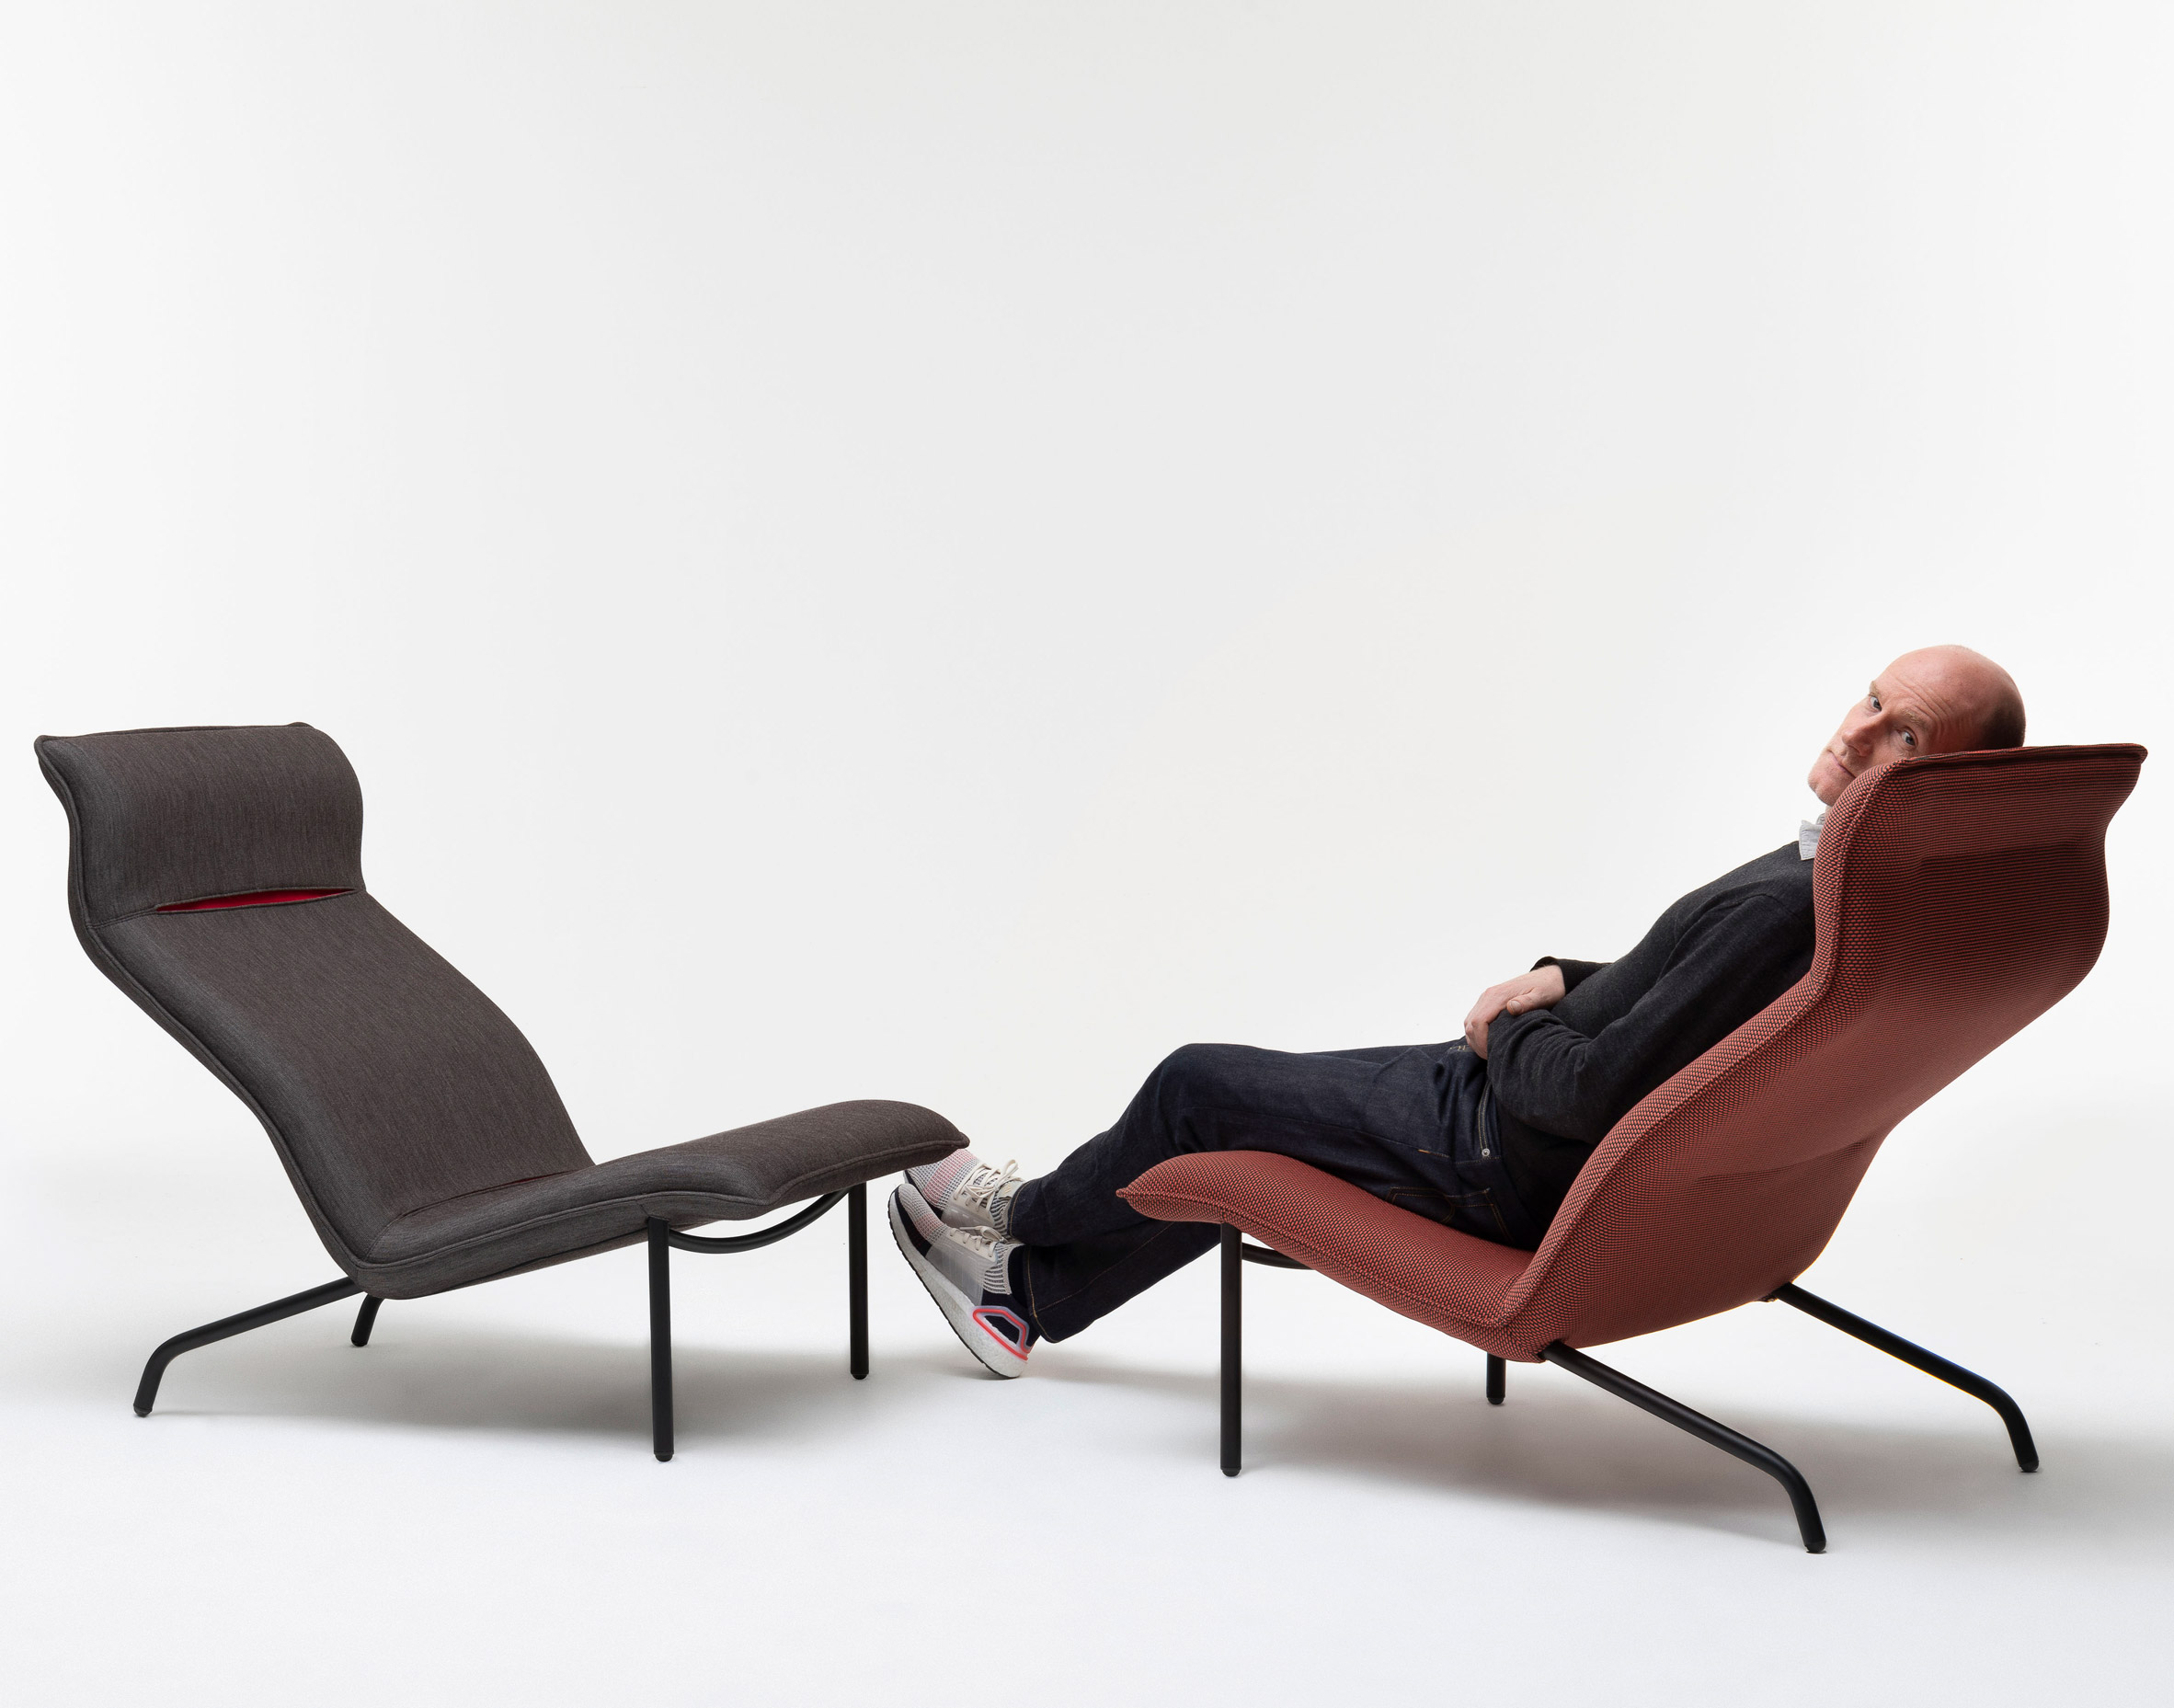 Lucio Lounge chair by SebastianWrong for Established & Sons